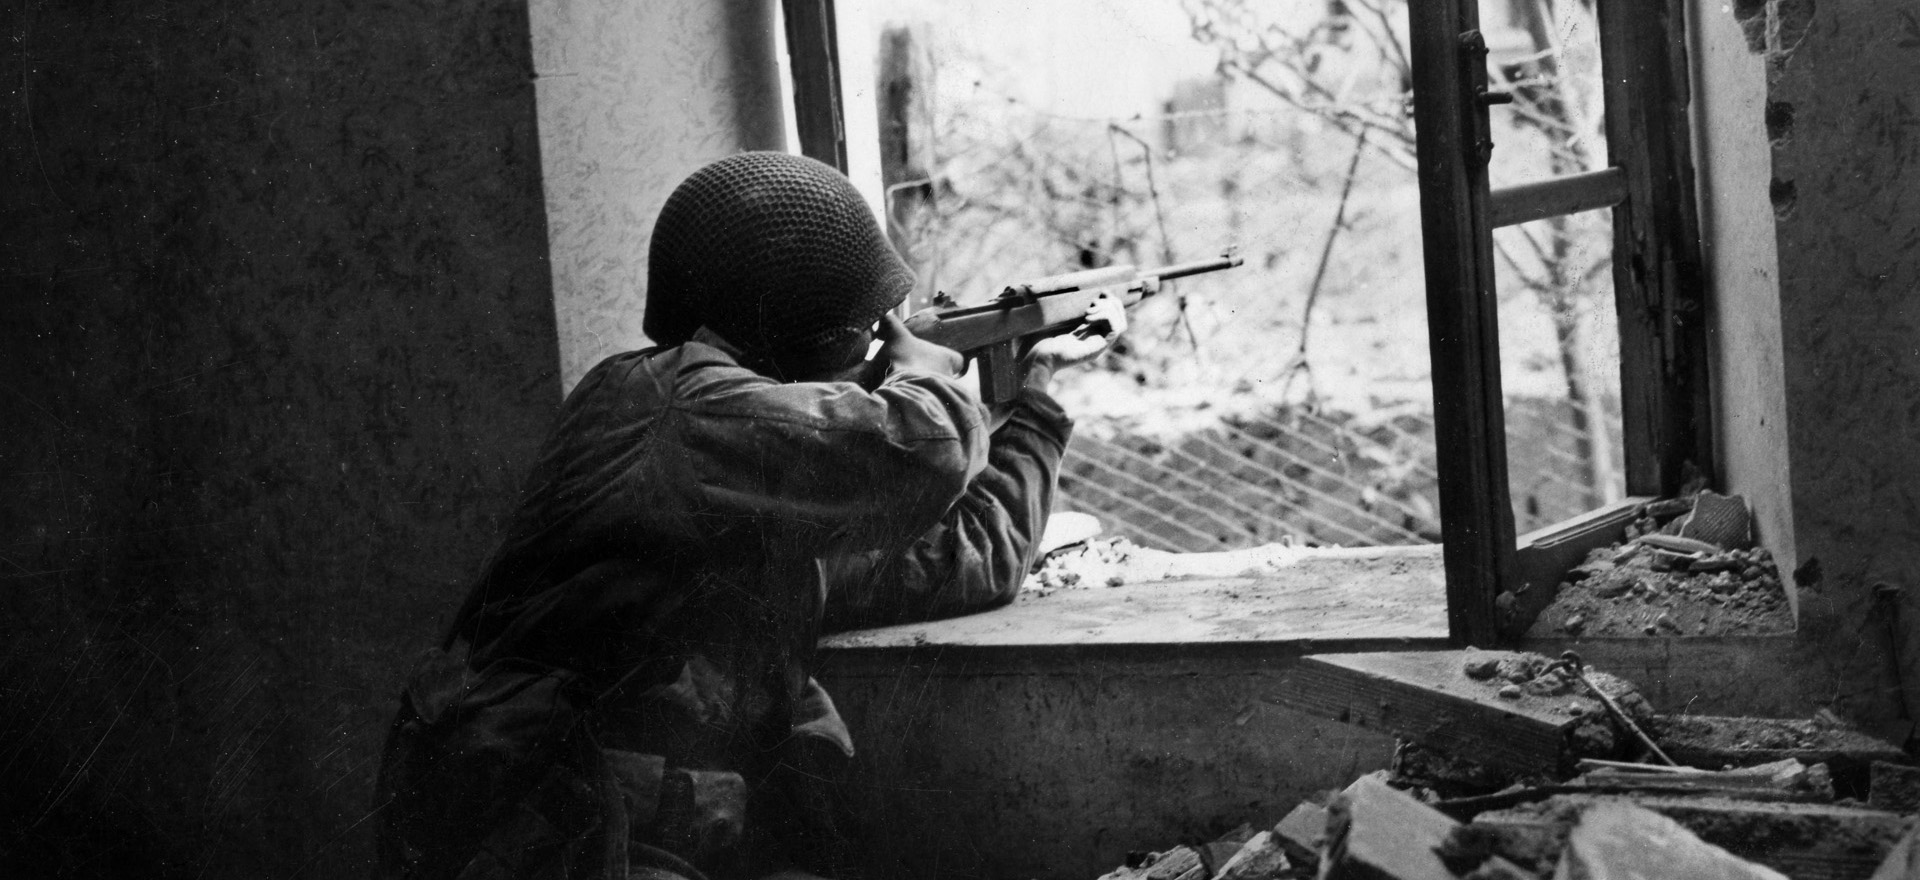 From urban combat to fighting in flat, open fields, from tank-vs.-tank duels, to aerial bombardments to ceaseless artillery barrages, the action at Anzio took on every dimension. Here an American GI uses his carbine to keep German forces at bay during the battle for Anzio that lasted from January to May 1944.